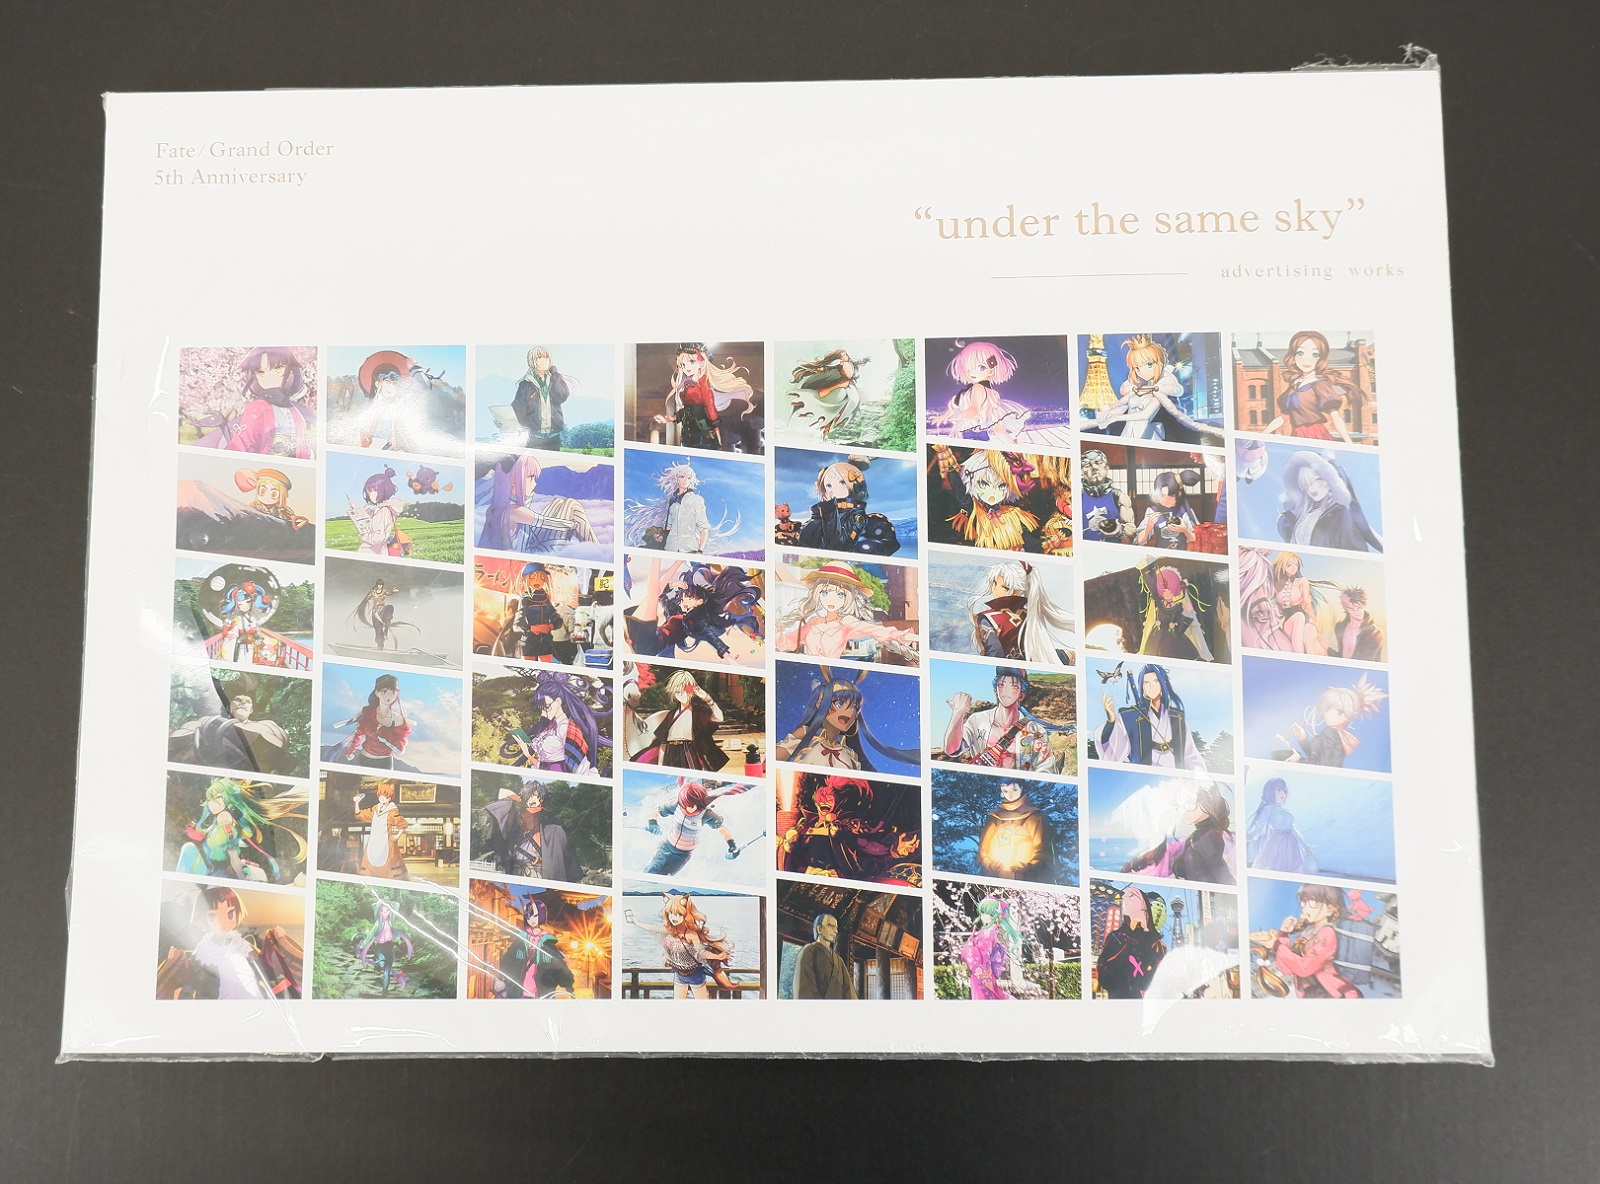 Fate/Grand Order 5th Anniversary under the same sky advertising works アニメーション